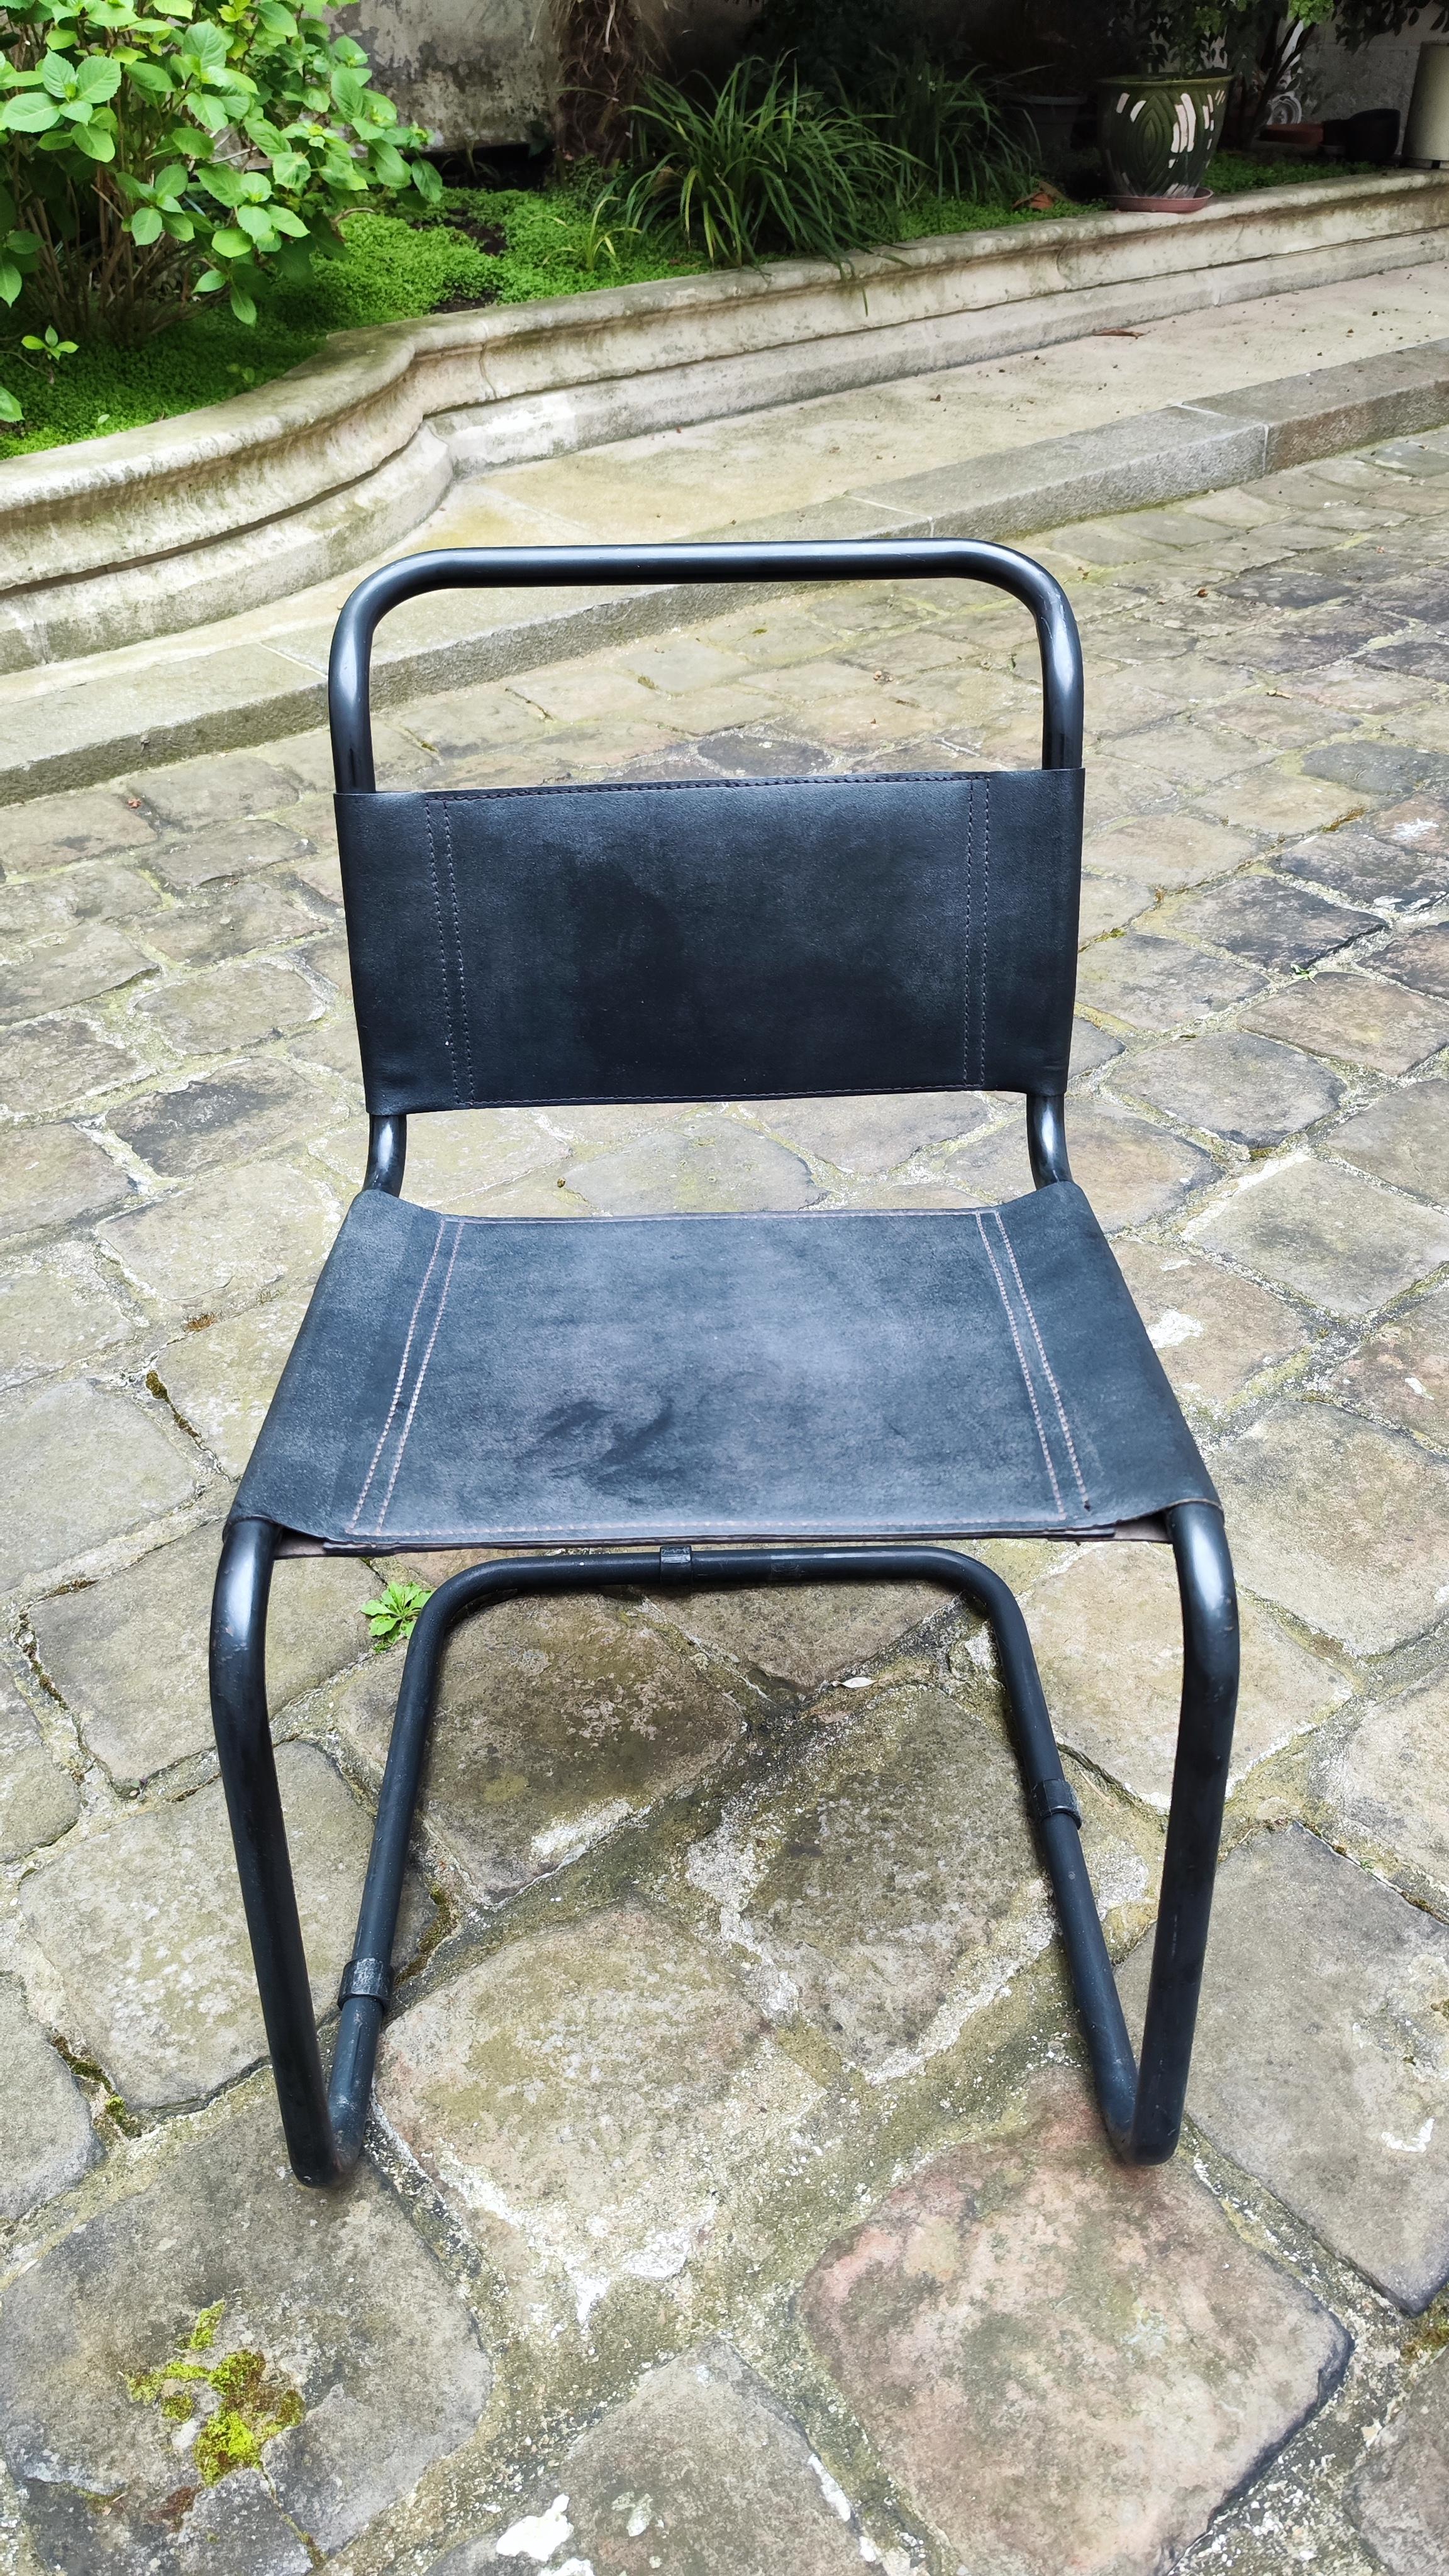 4 B33 MART STAM CANTILEVER CHAIRS AND 1 S34 ARMCHAIR - 80s  - 1980 For Sale 5